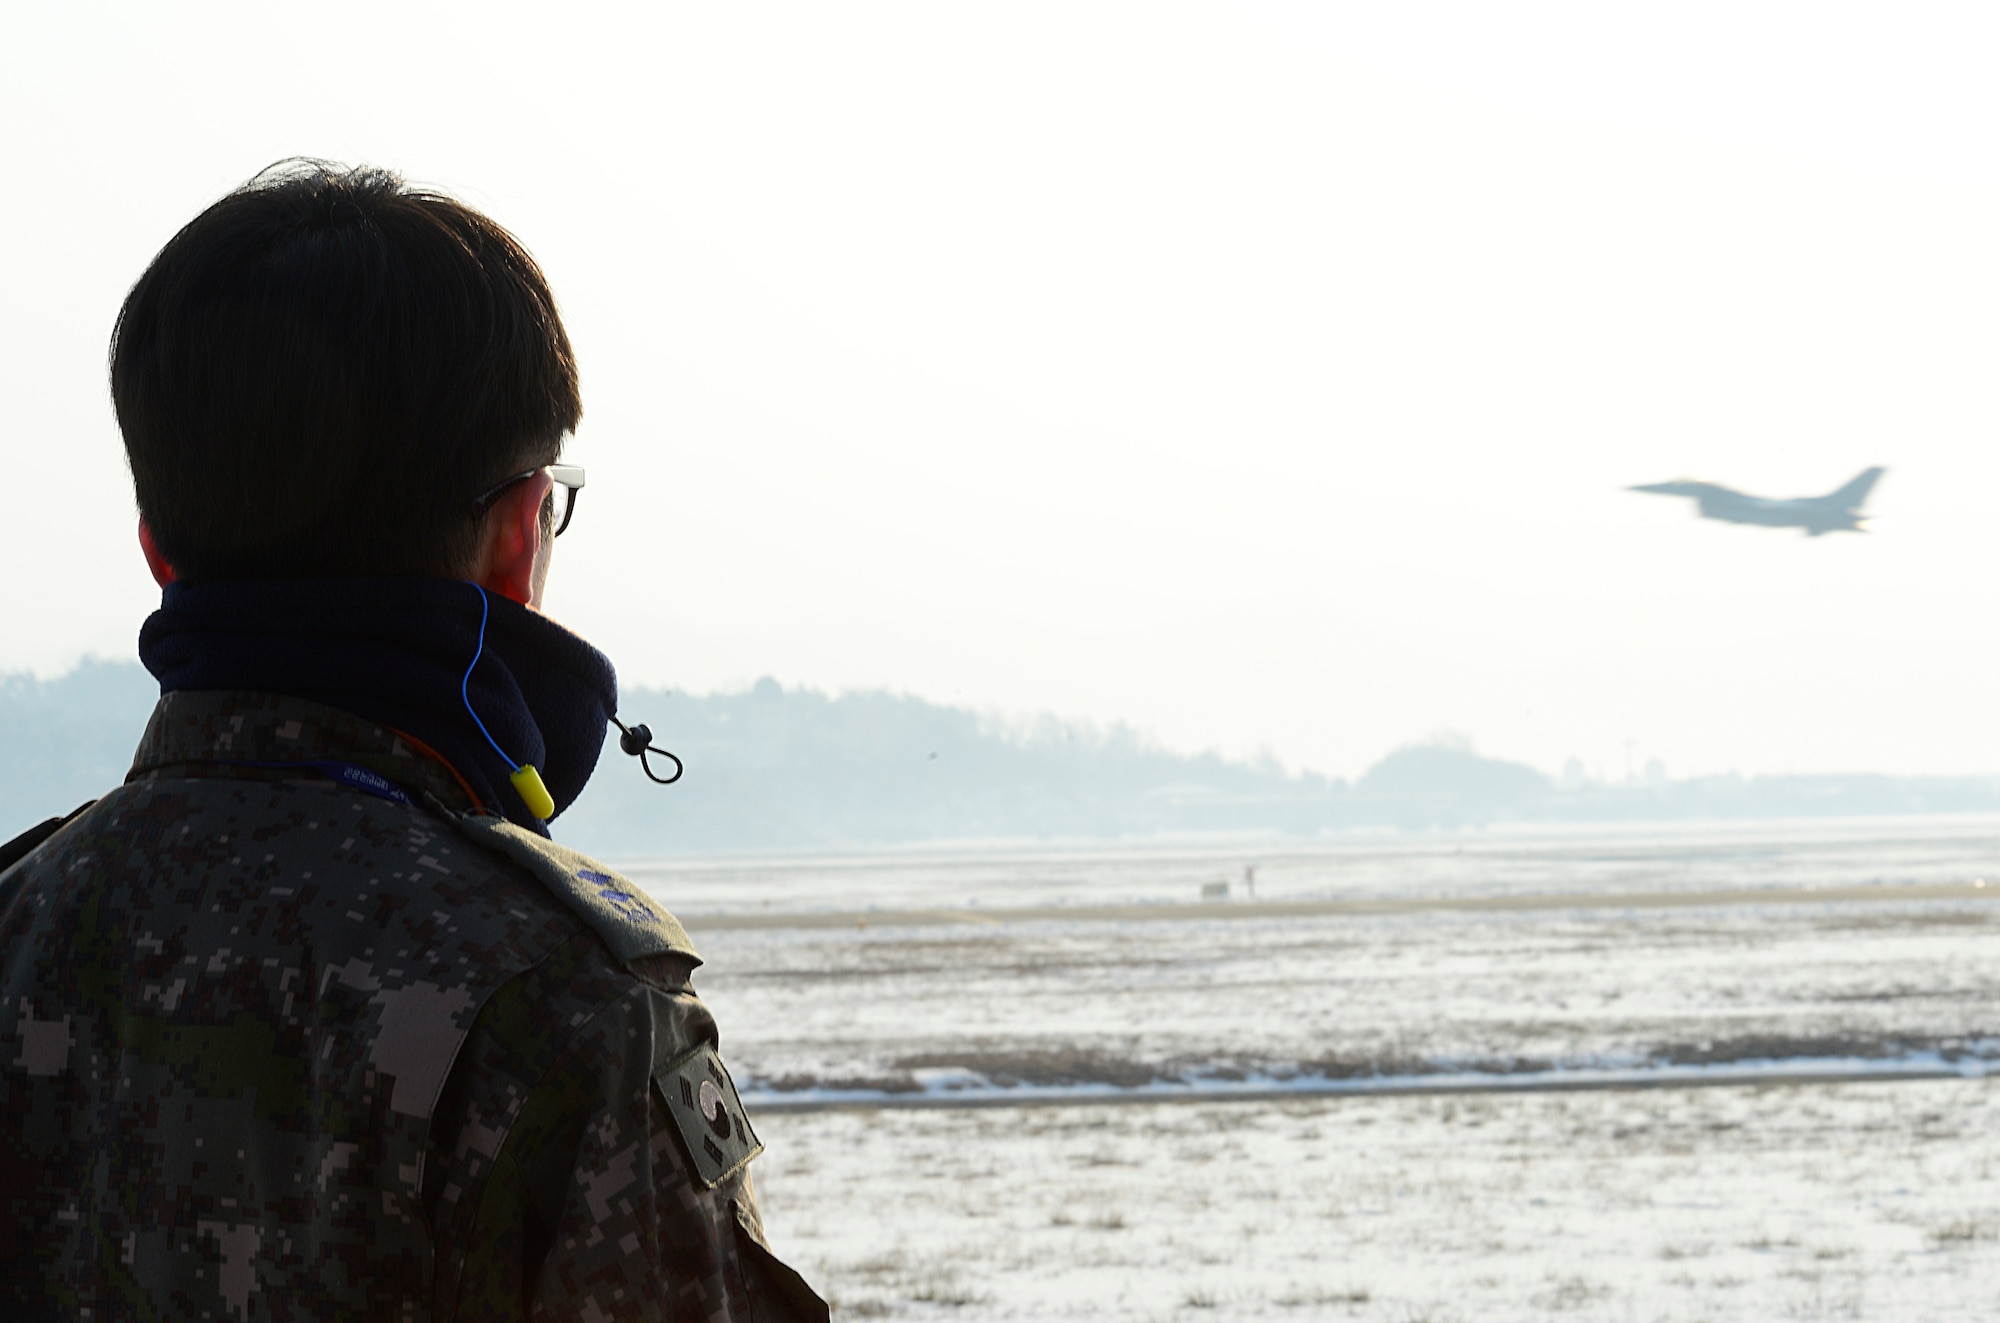 An airman from the Republic of Korea air force watches an F-16 Fighting Falcon from the 36th Fighter Squadron takeoff during Buddy Wing 16-1 at Seosan Air Base, ROK, Jan. 28, 2016. The Buddy Wing exercise is a combined fighter exchange program between the U.S. and ROKAF to promote solidarity and mutual understanding of all executed operations. (U.S. Air Force photo by Senior Airman Kristin High/Released)